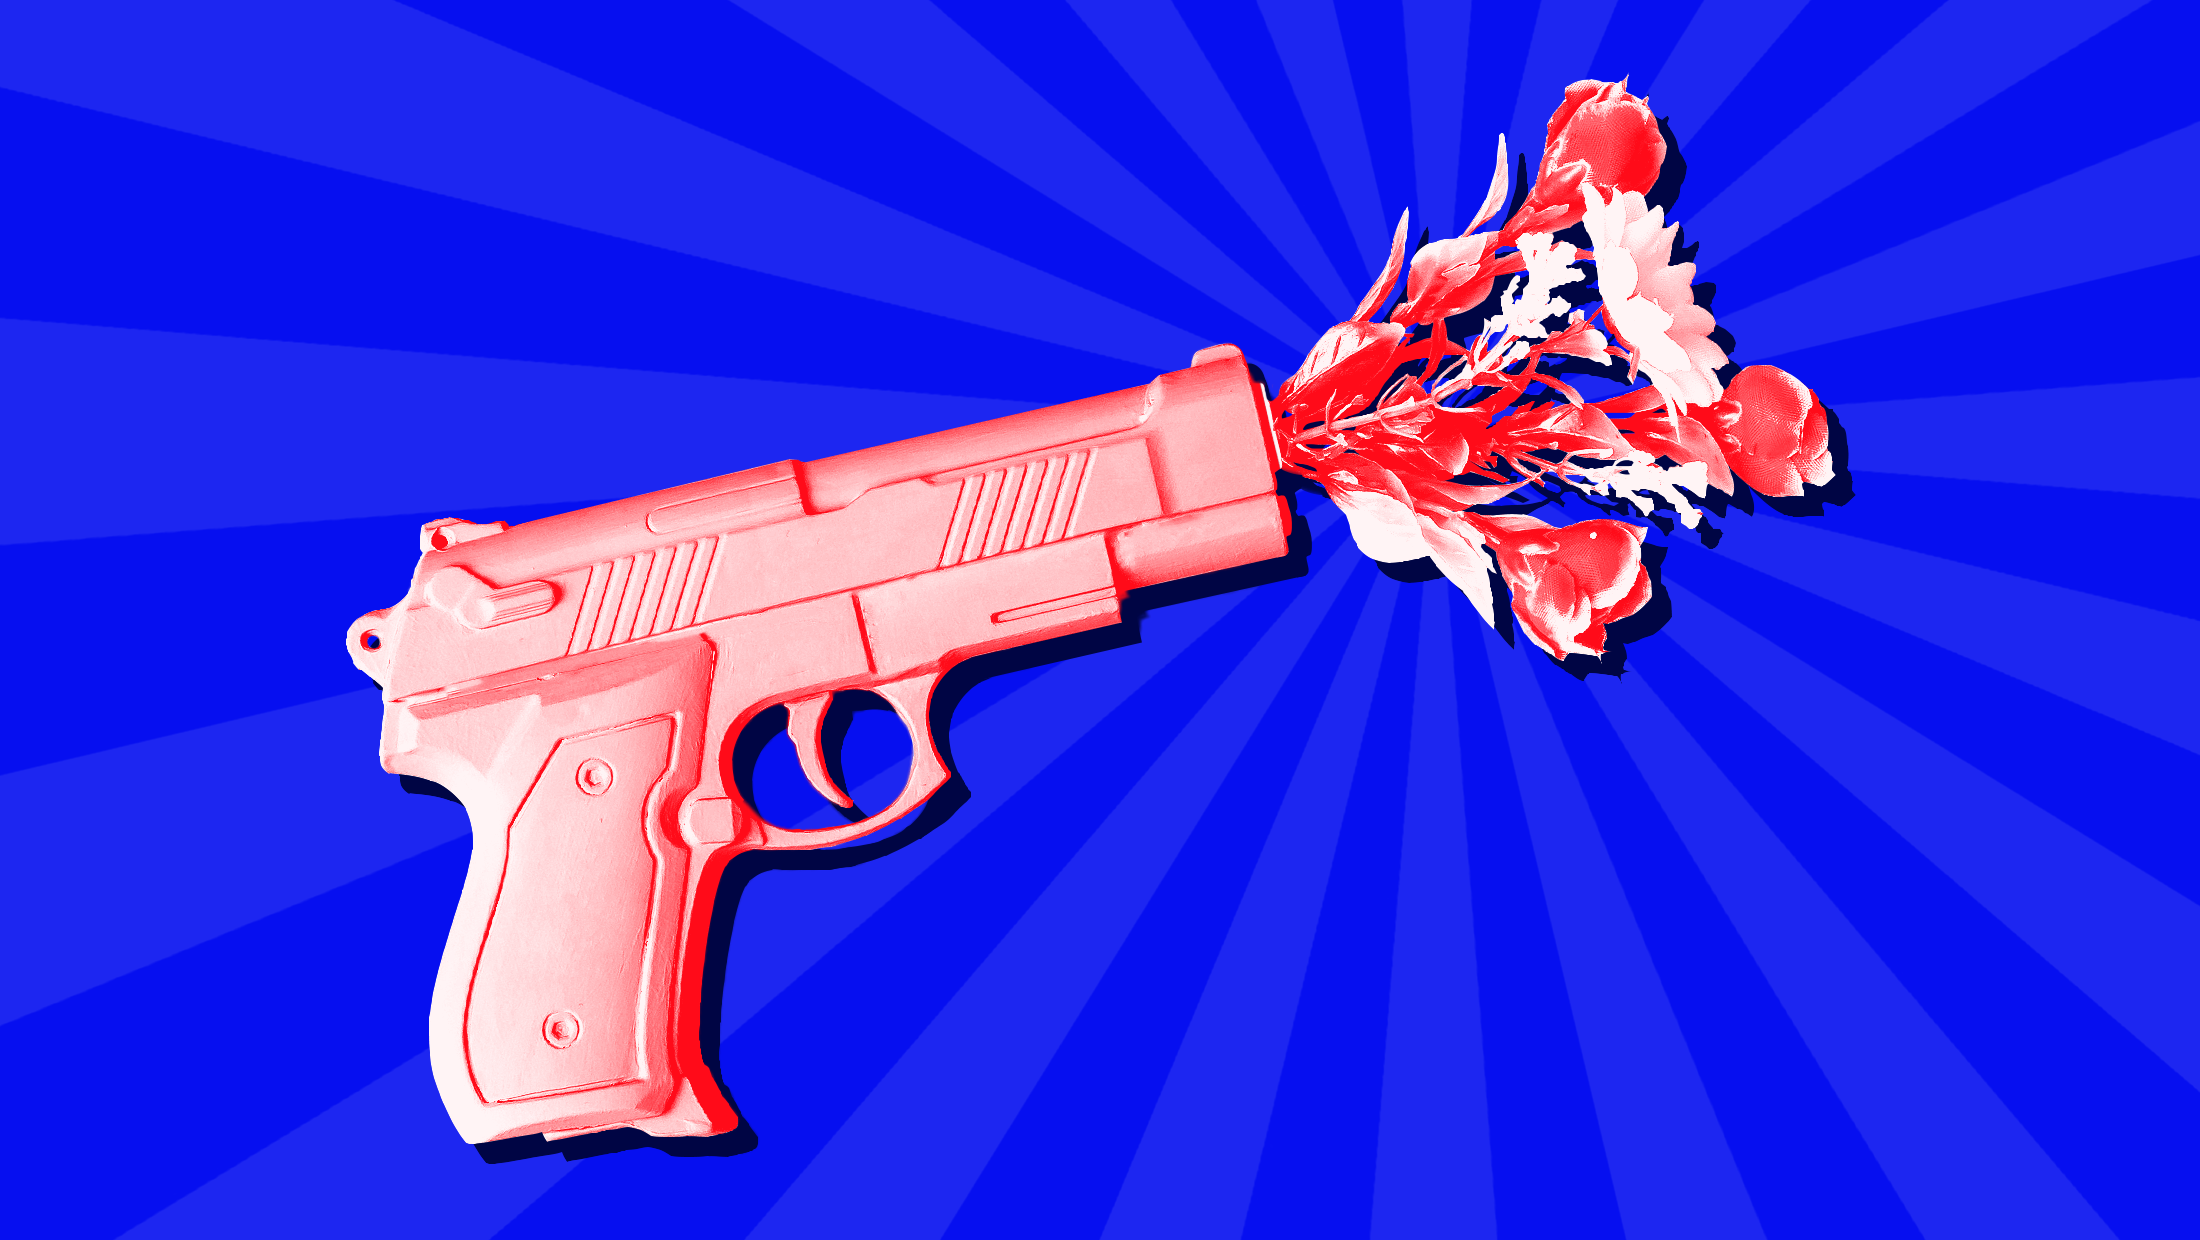 Blue background with red gun blowing out red flowers.